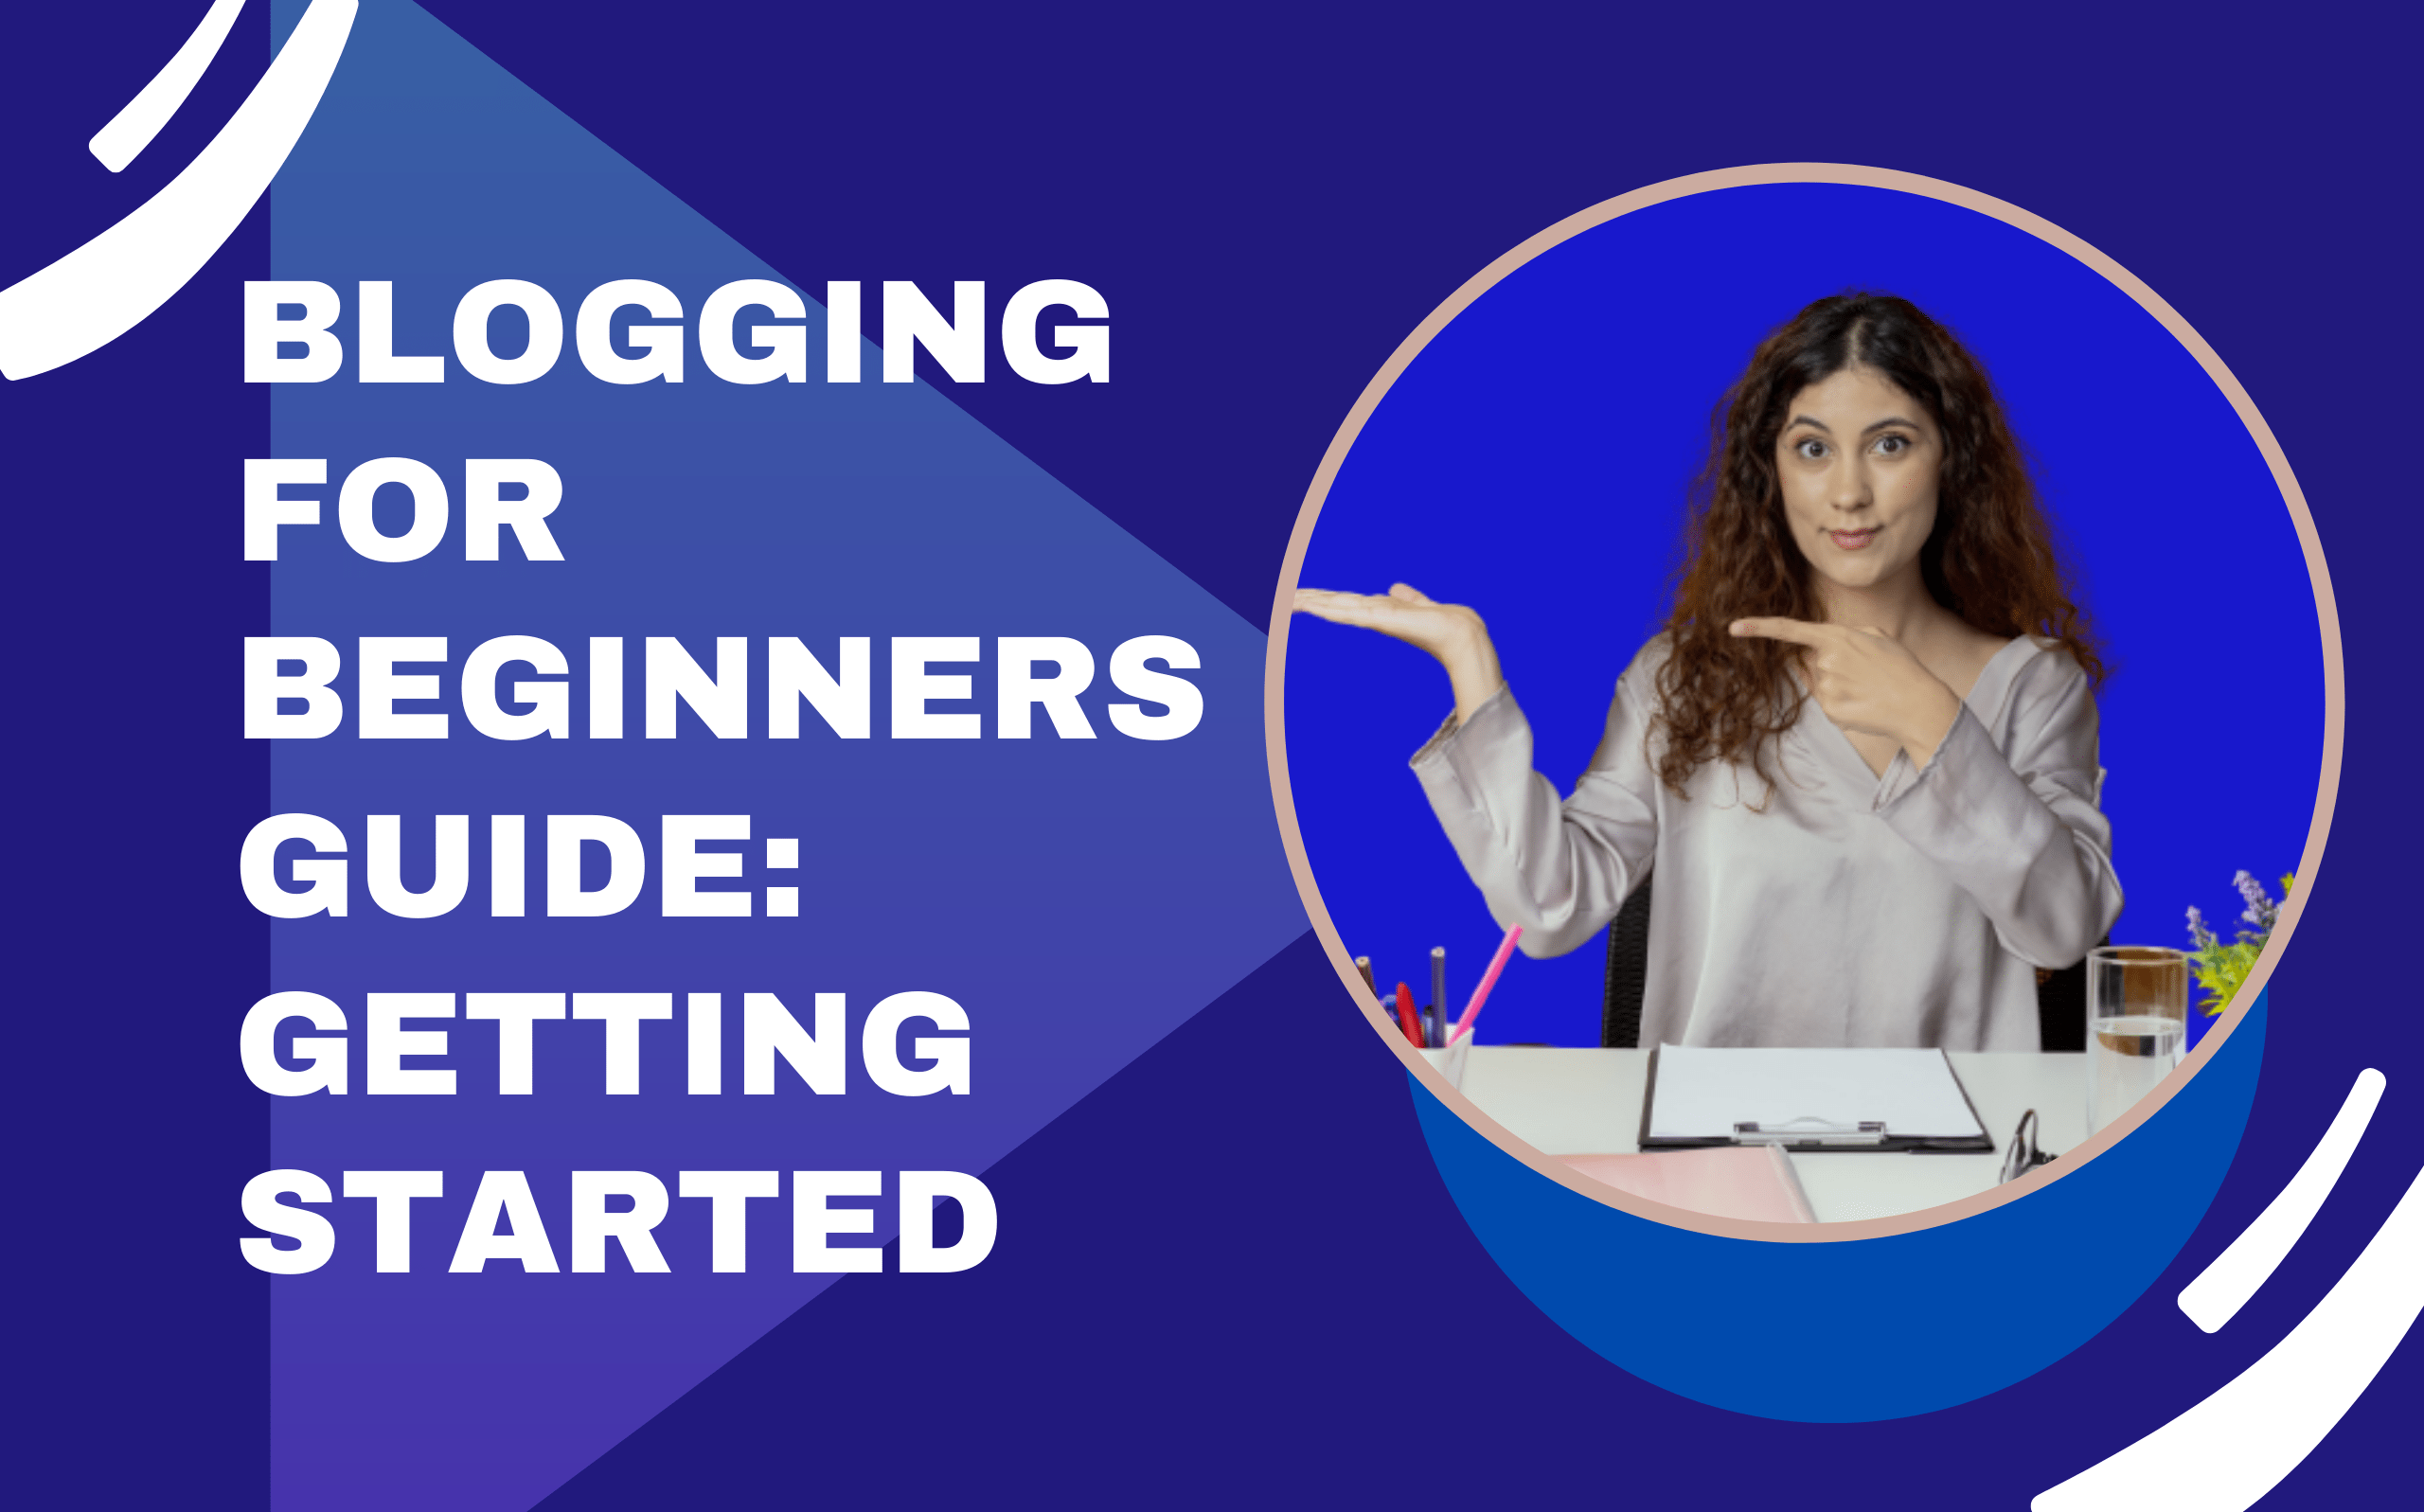 Blogging for Beginners Guide: Getting Started